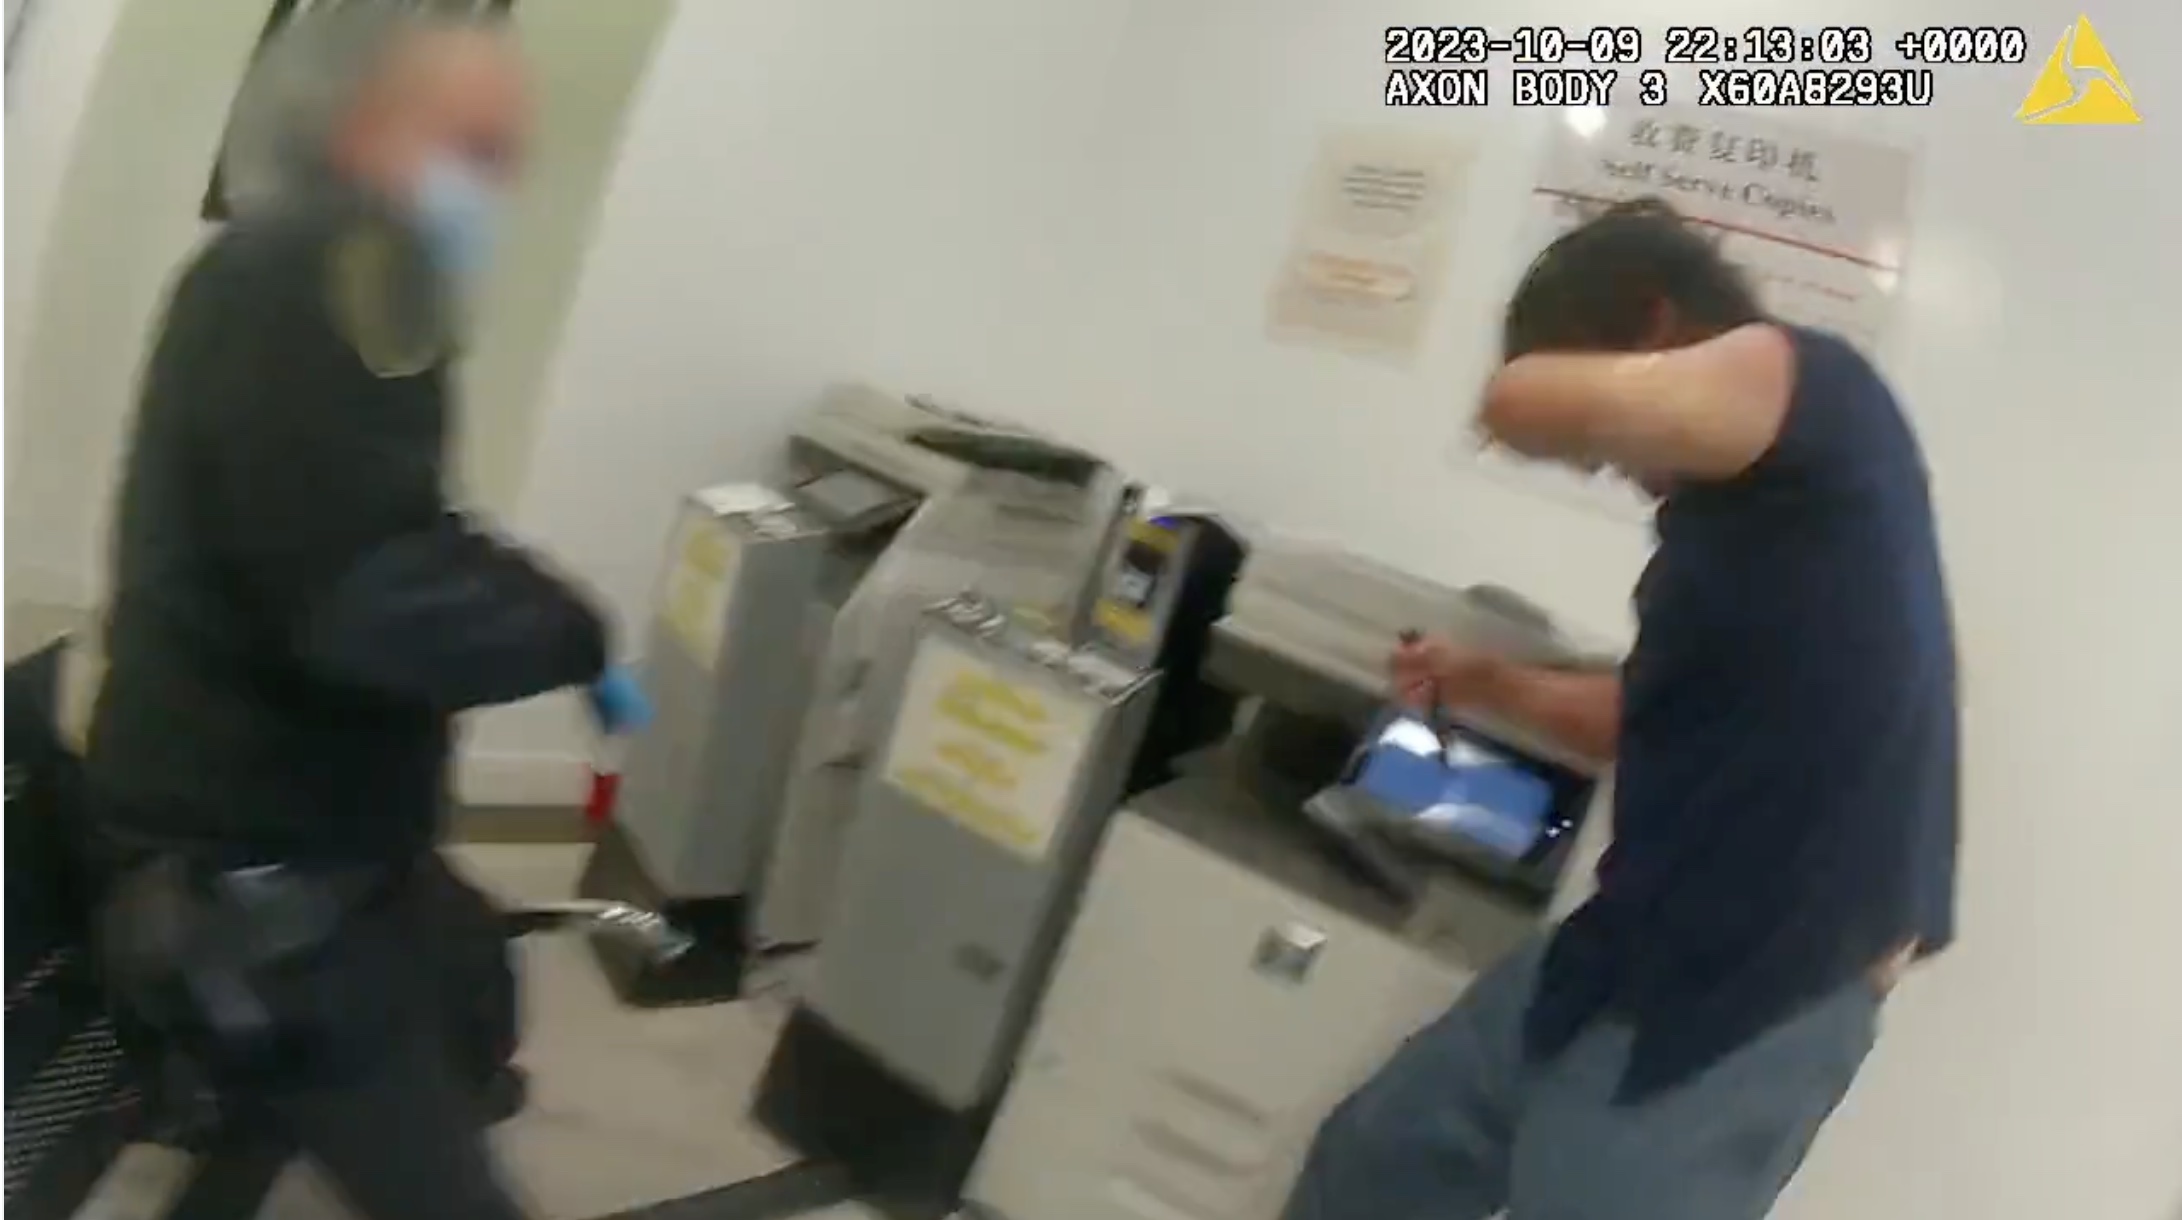 A man swings a knife at a security guard.